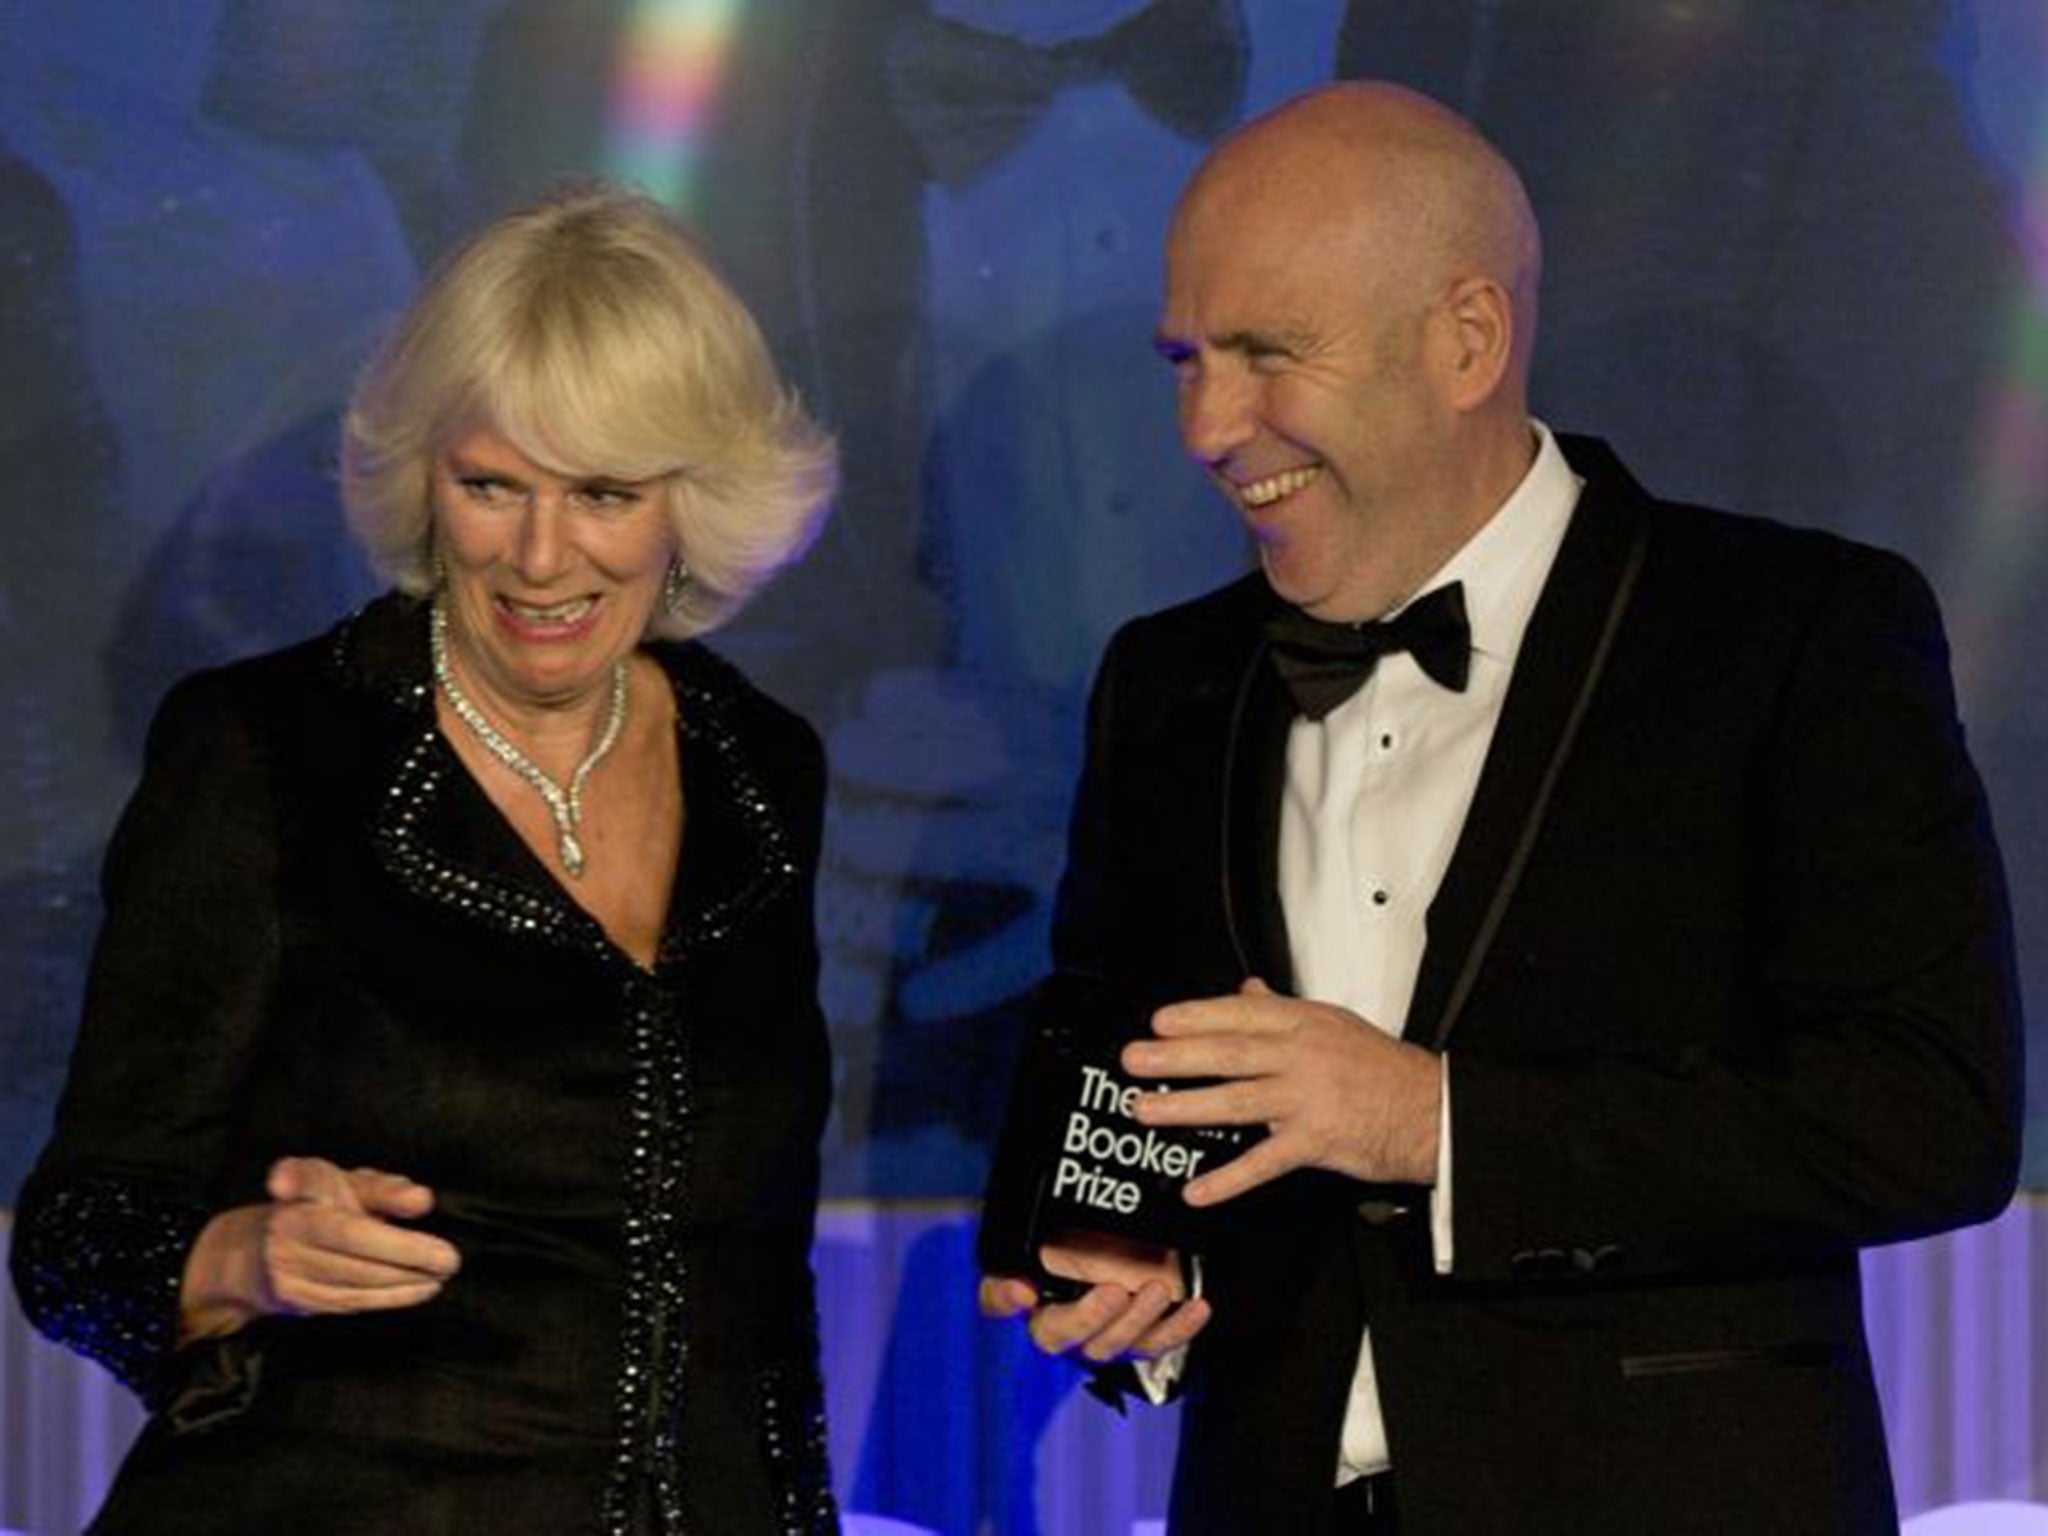 Royal approval: the Duchess of Cornwall presents Richard Flanagan with the Man Booker Prize for Fiction (Reuters)